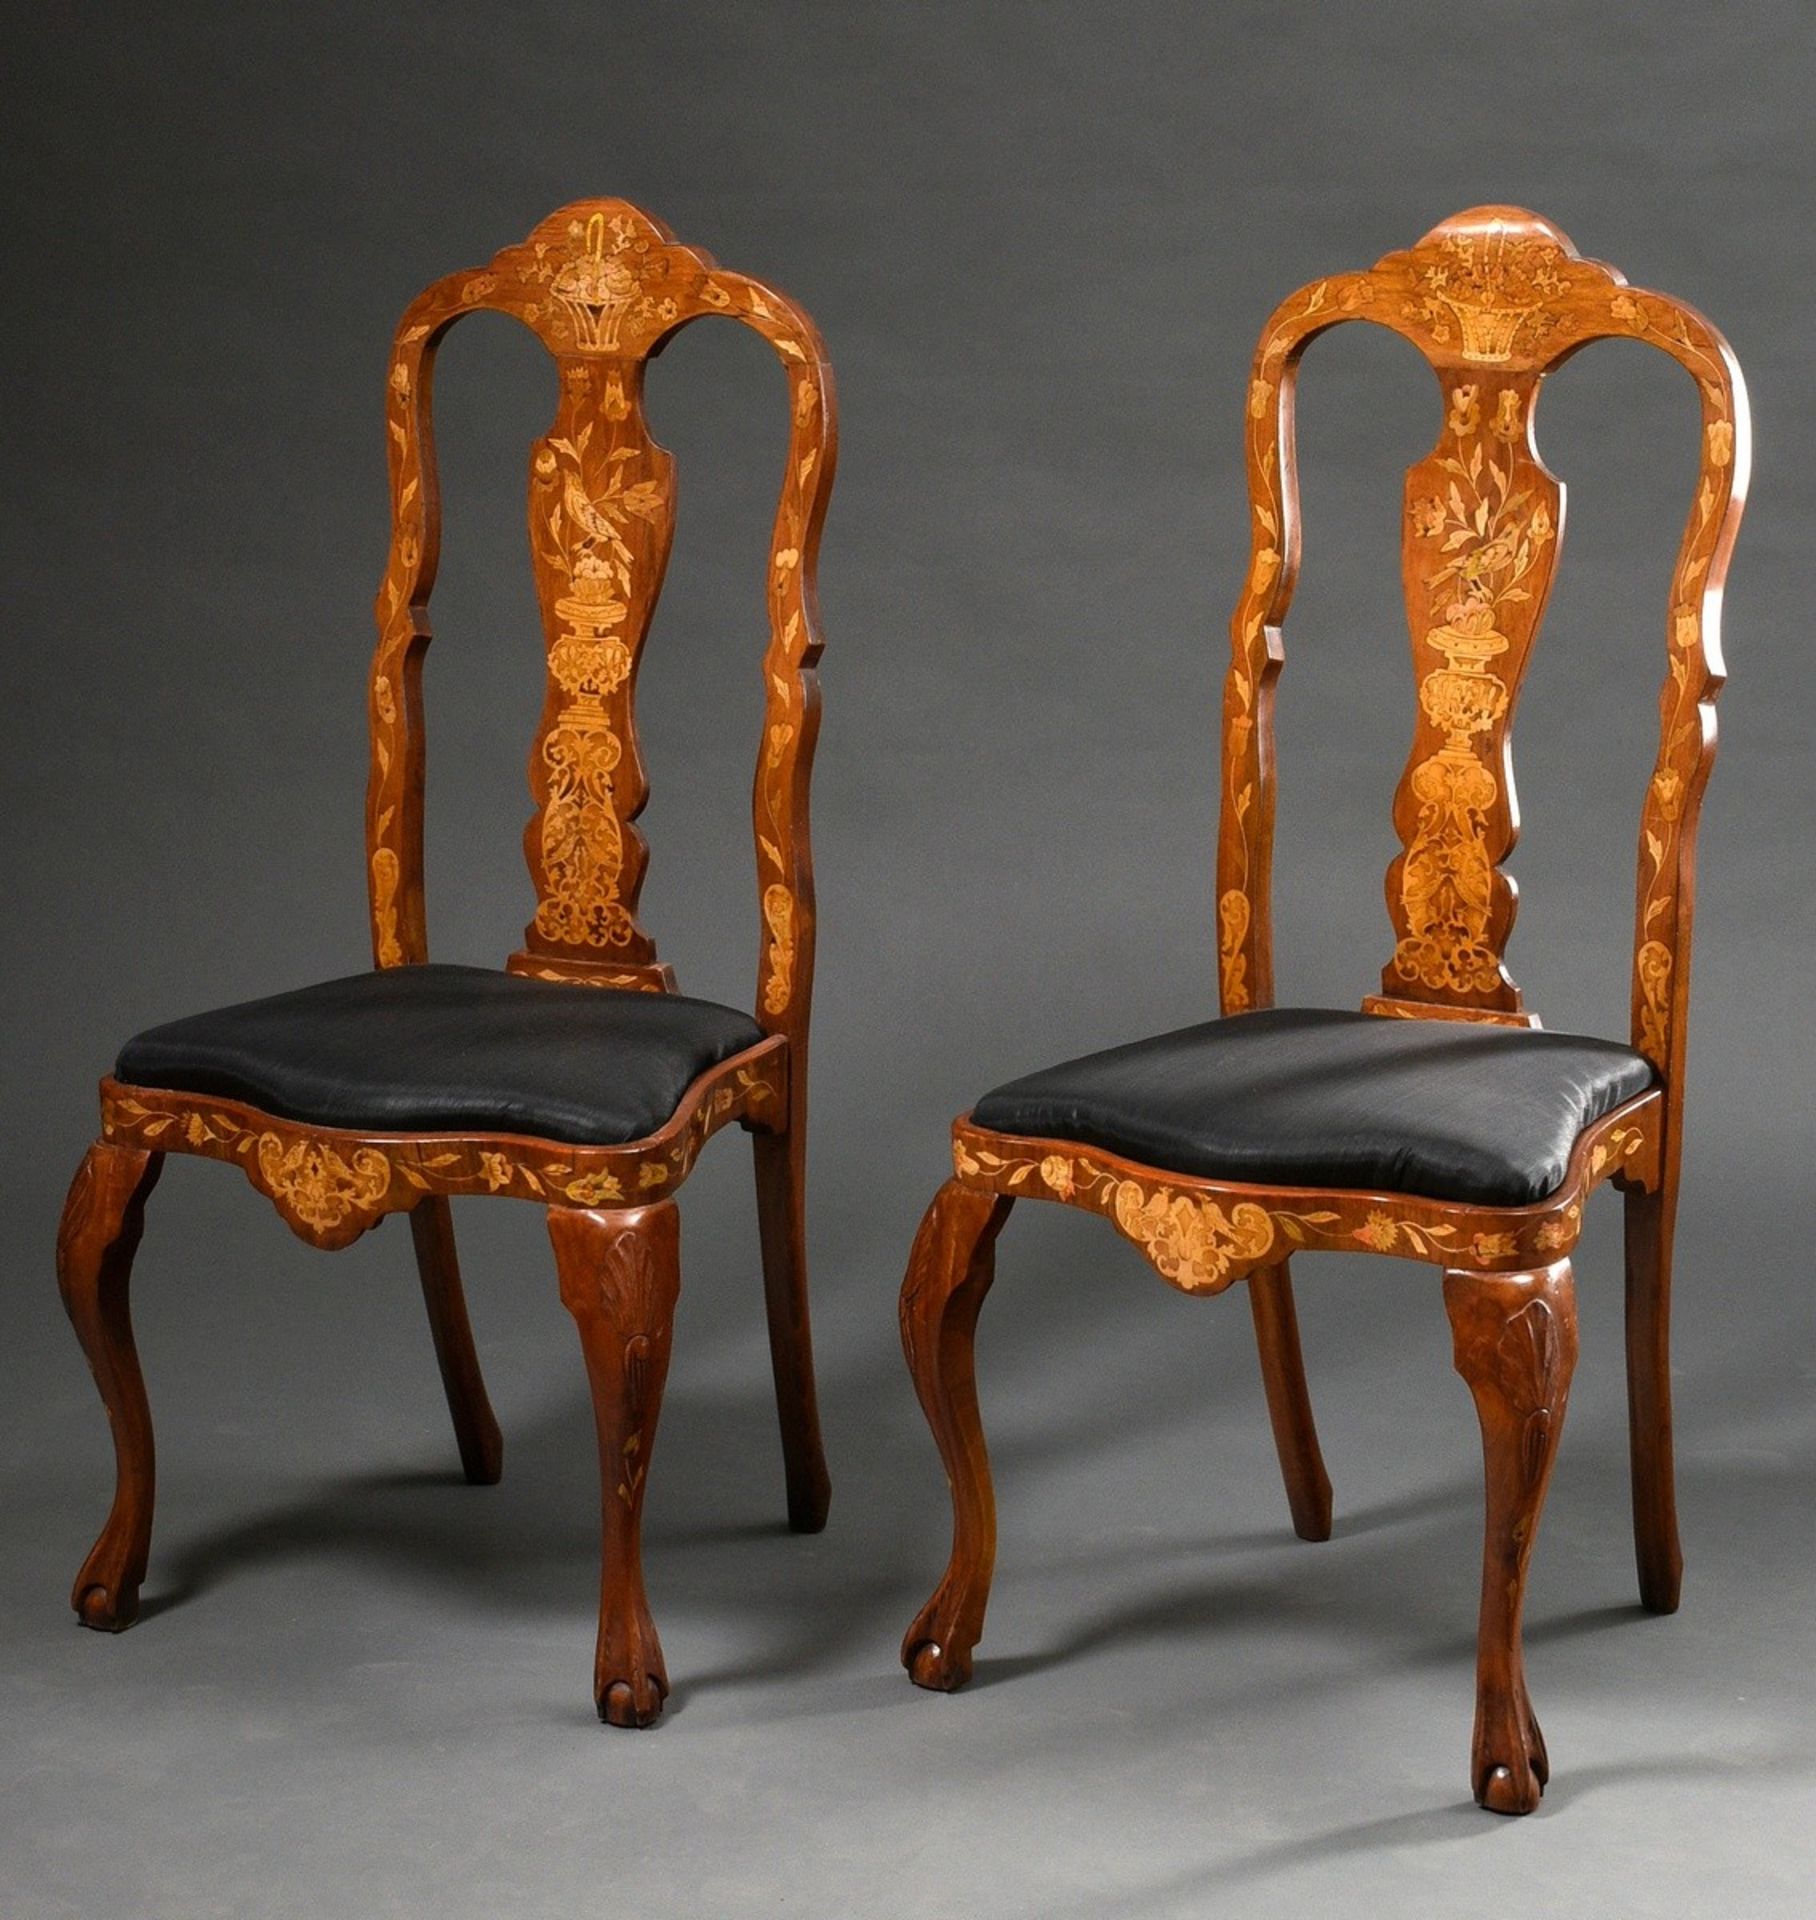 Pair of baroque chairs with elaborately inlaid frames "flower basket and vase with bird" on curved 